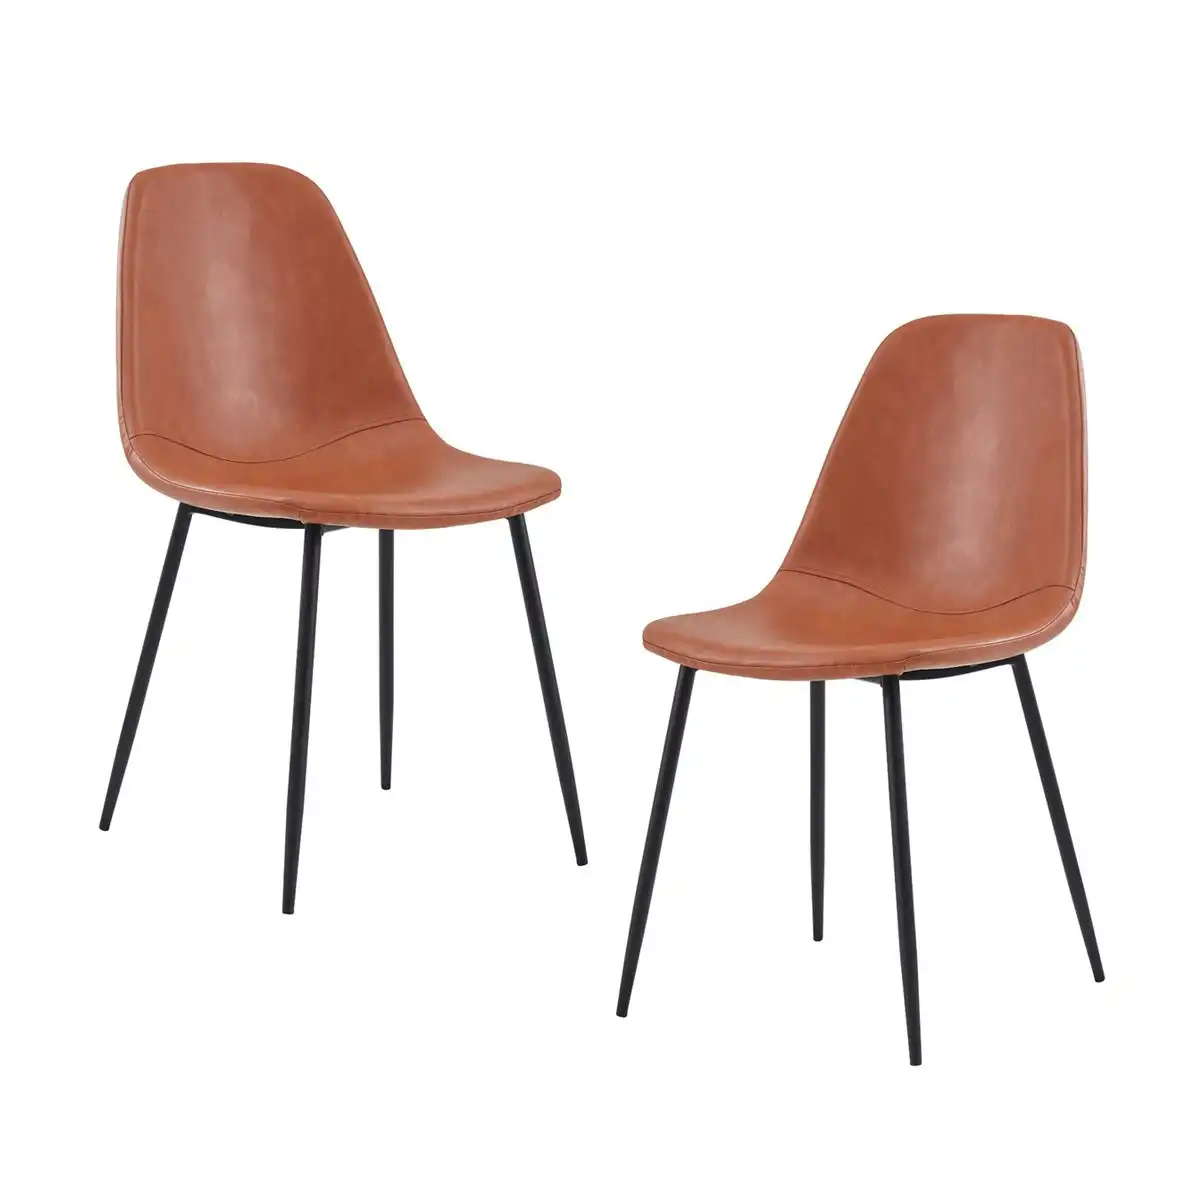 Luca Leatherette Dining Chair (Set of 2, Black, Tan)